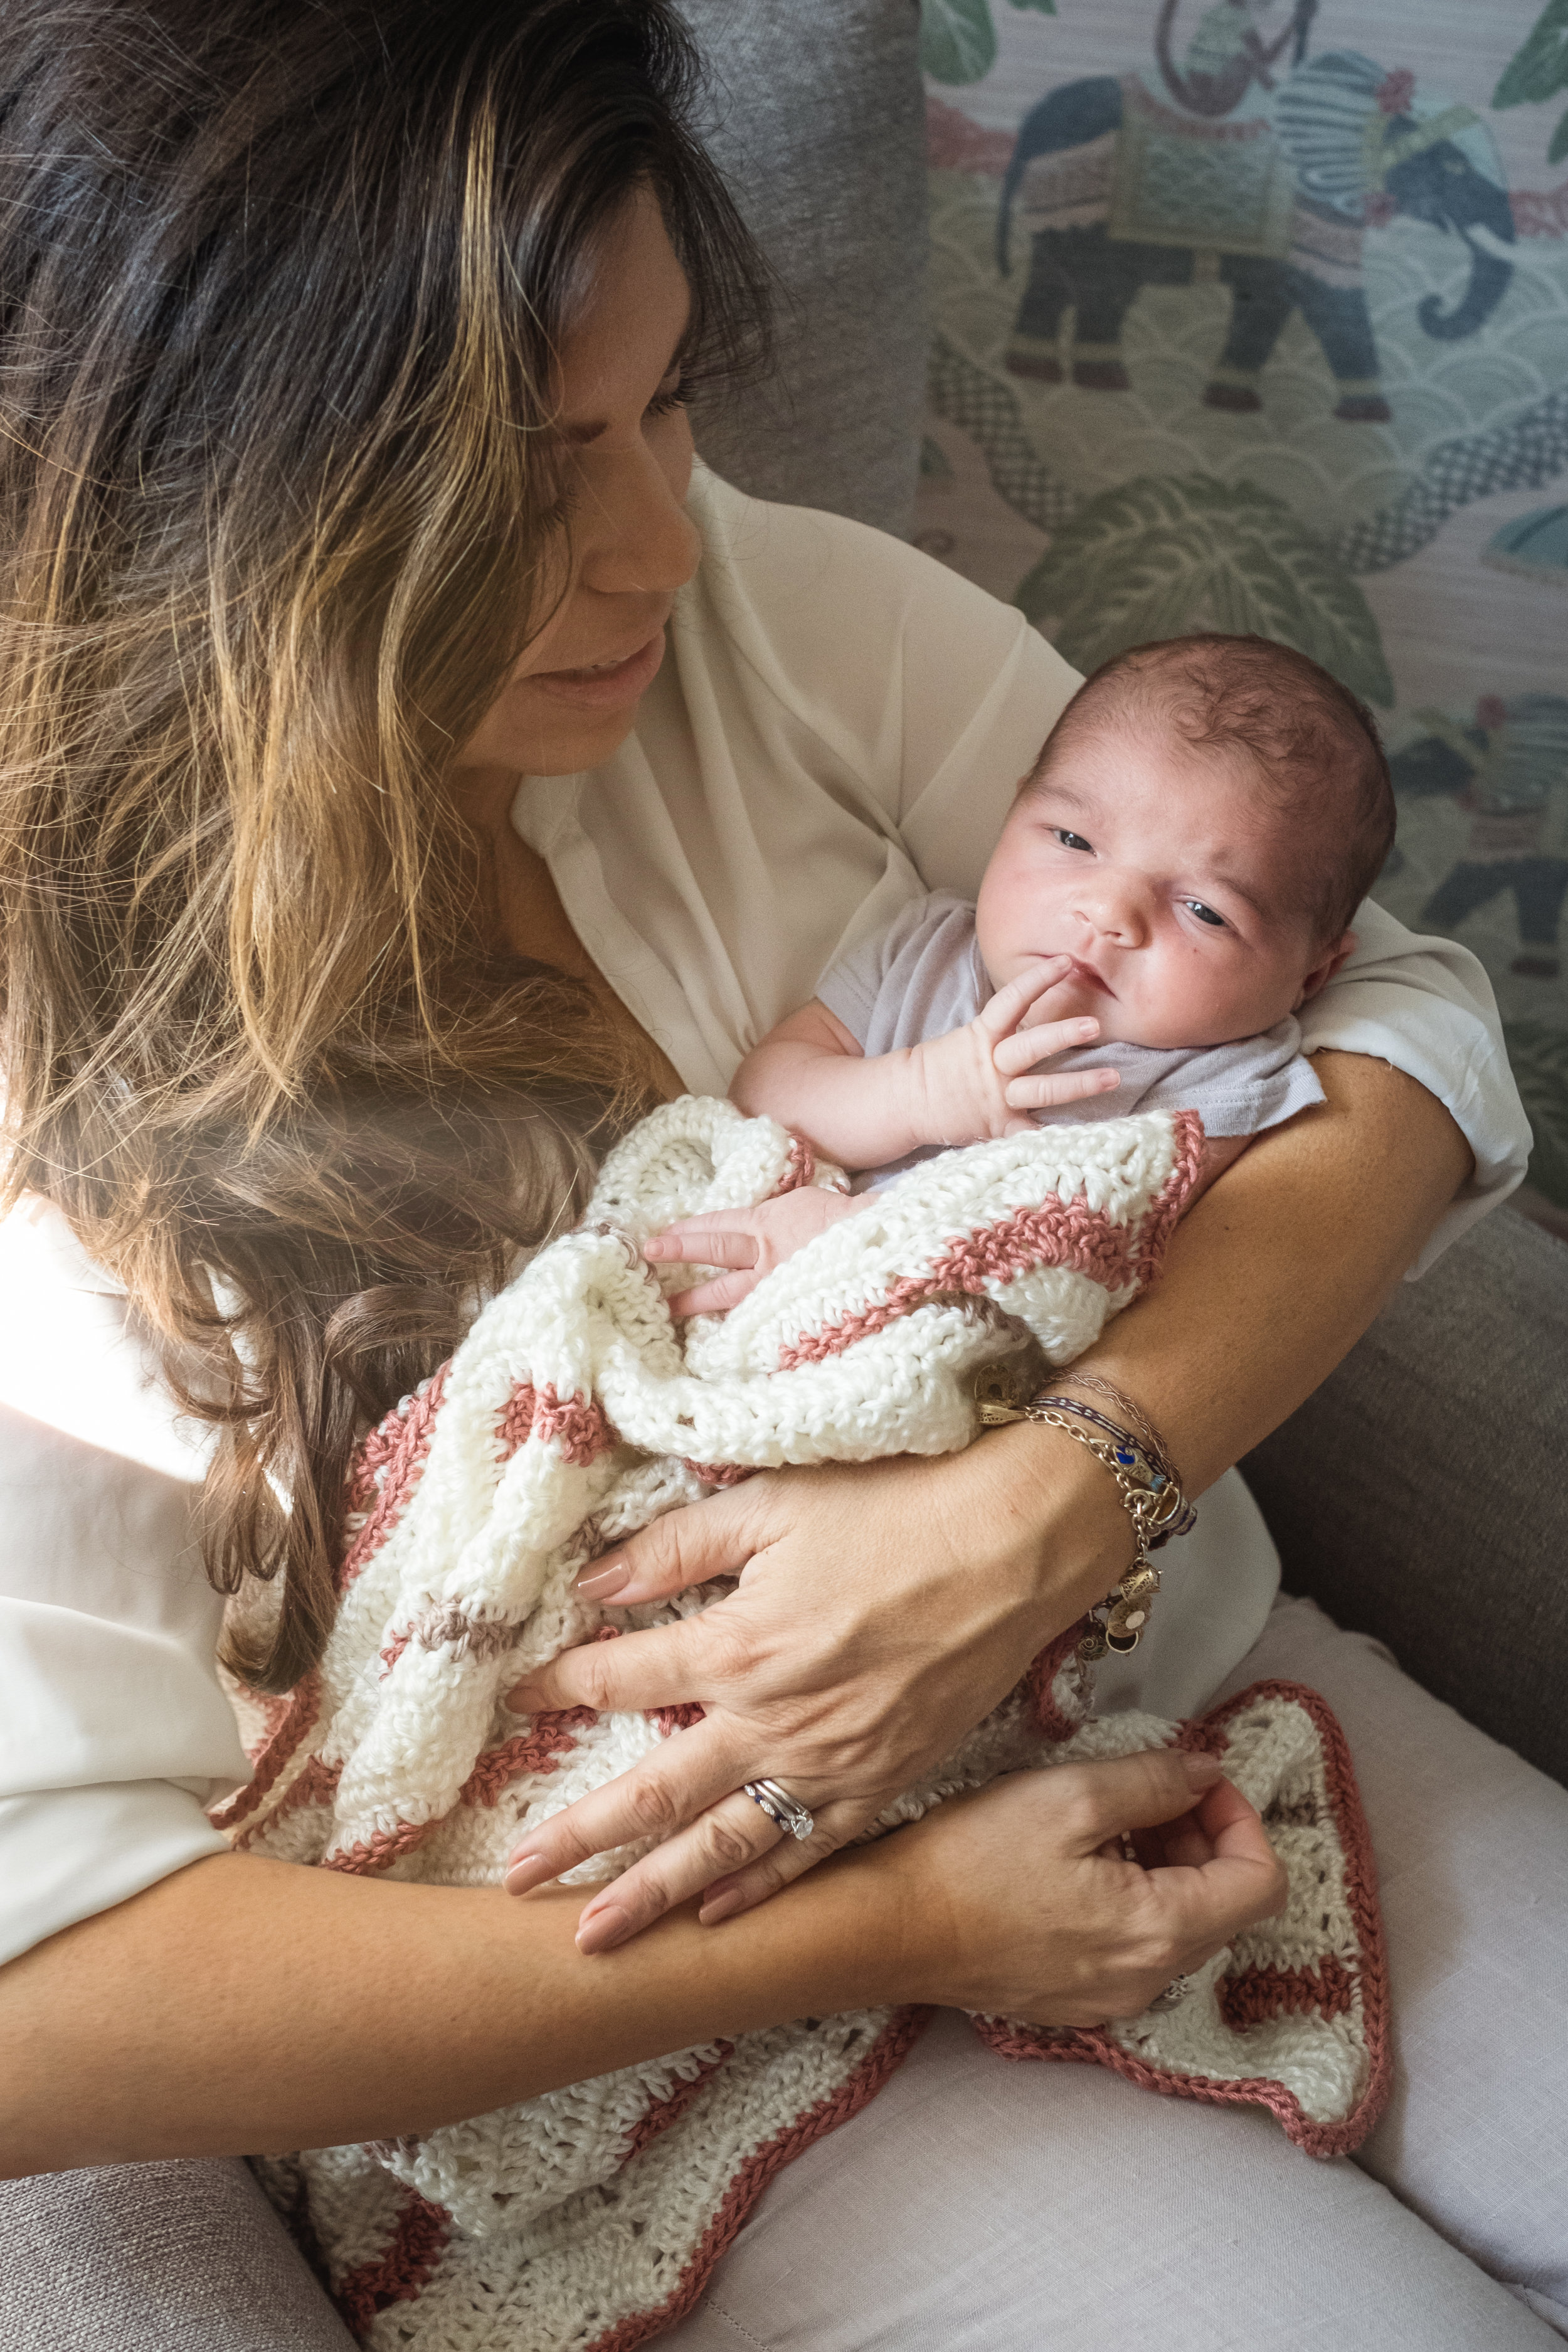 seated mother cuddles newborn daughter who looks at camera in photograph